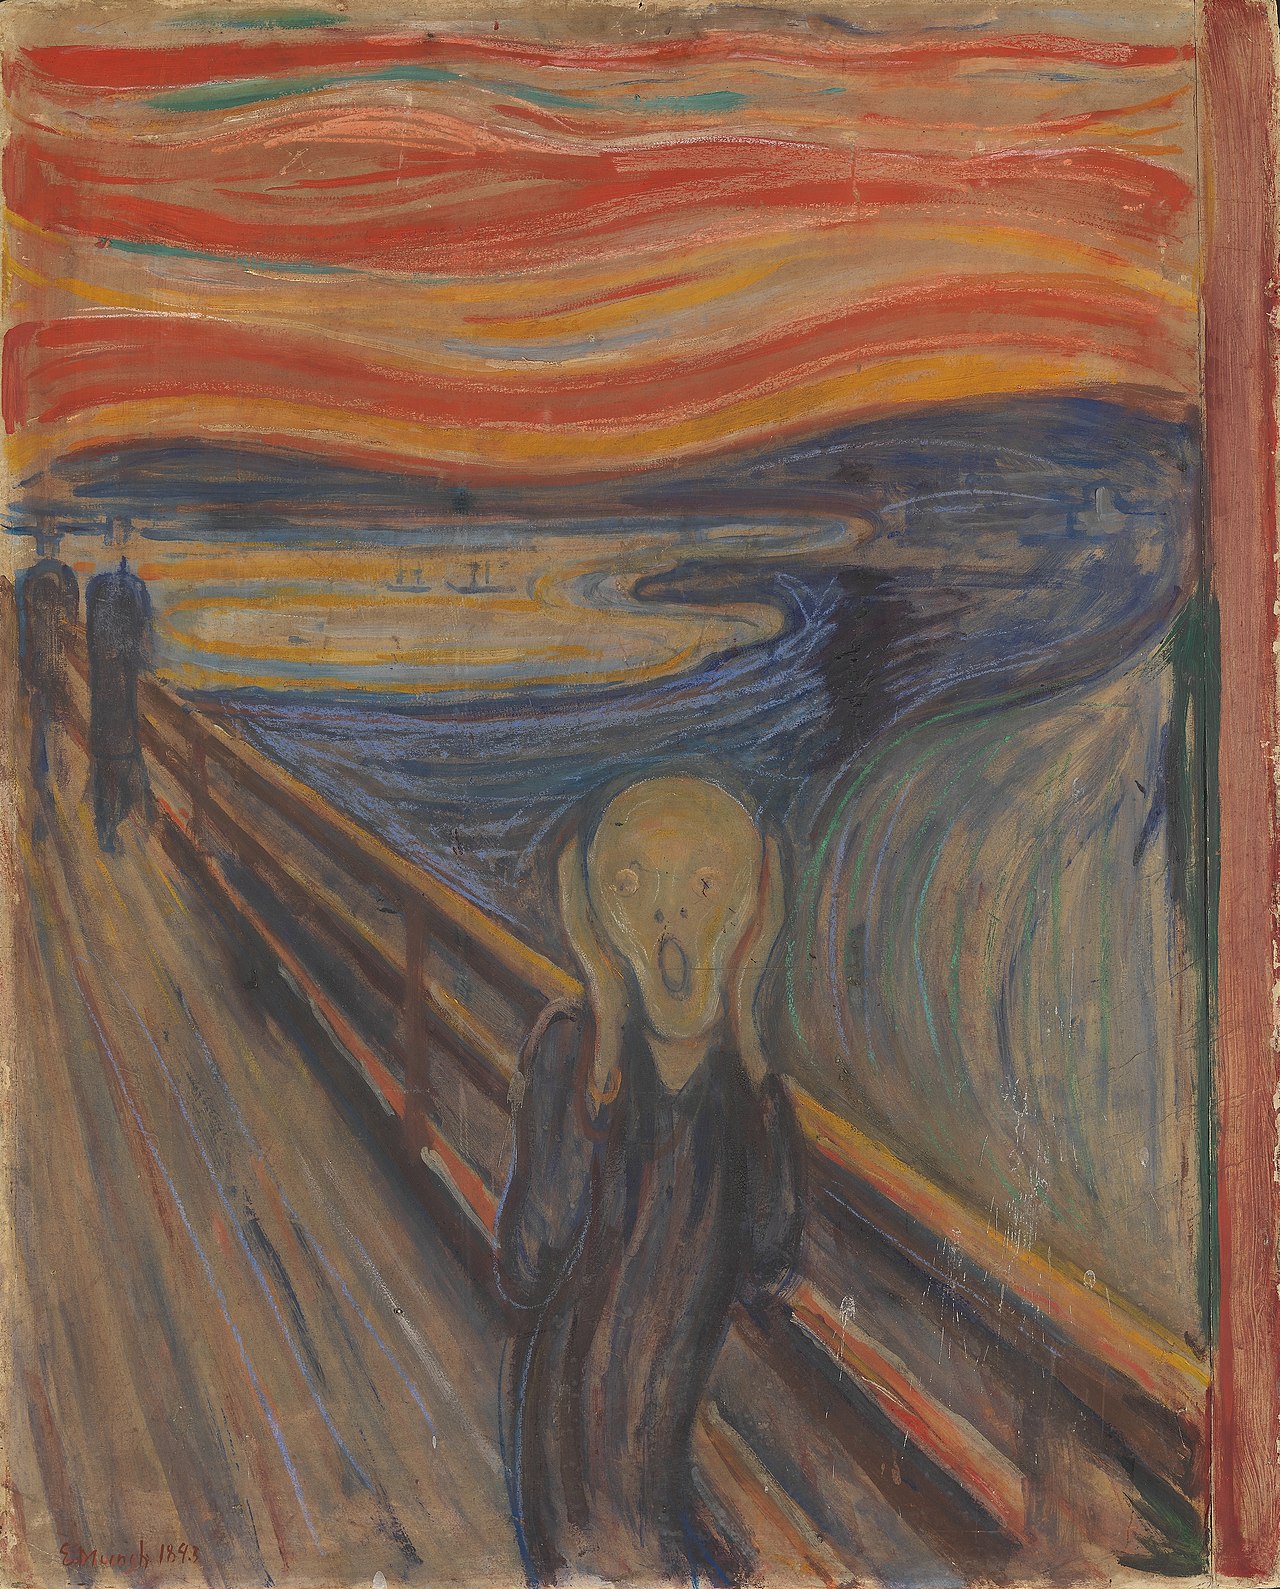 1280px-Edvard Munch, 1893, The Scream, oil, tempera and pastel on cardboard, 91 x 73 cm, National Gallery of Norway